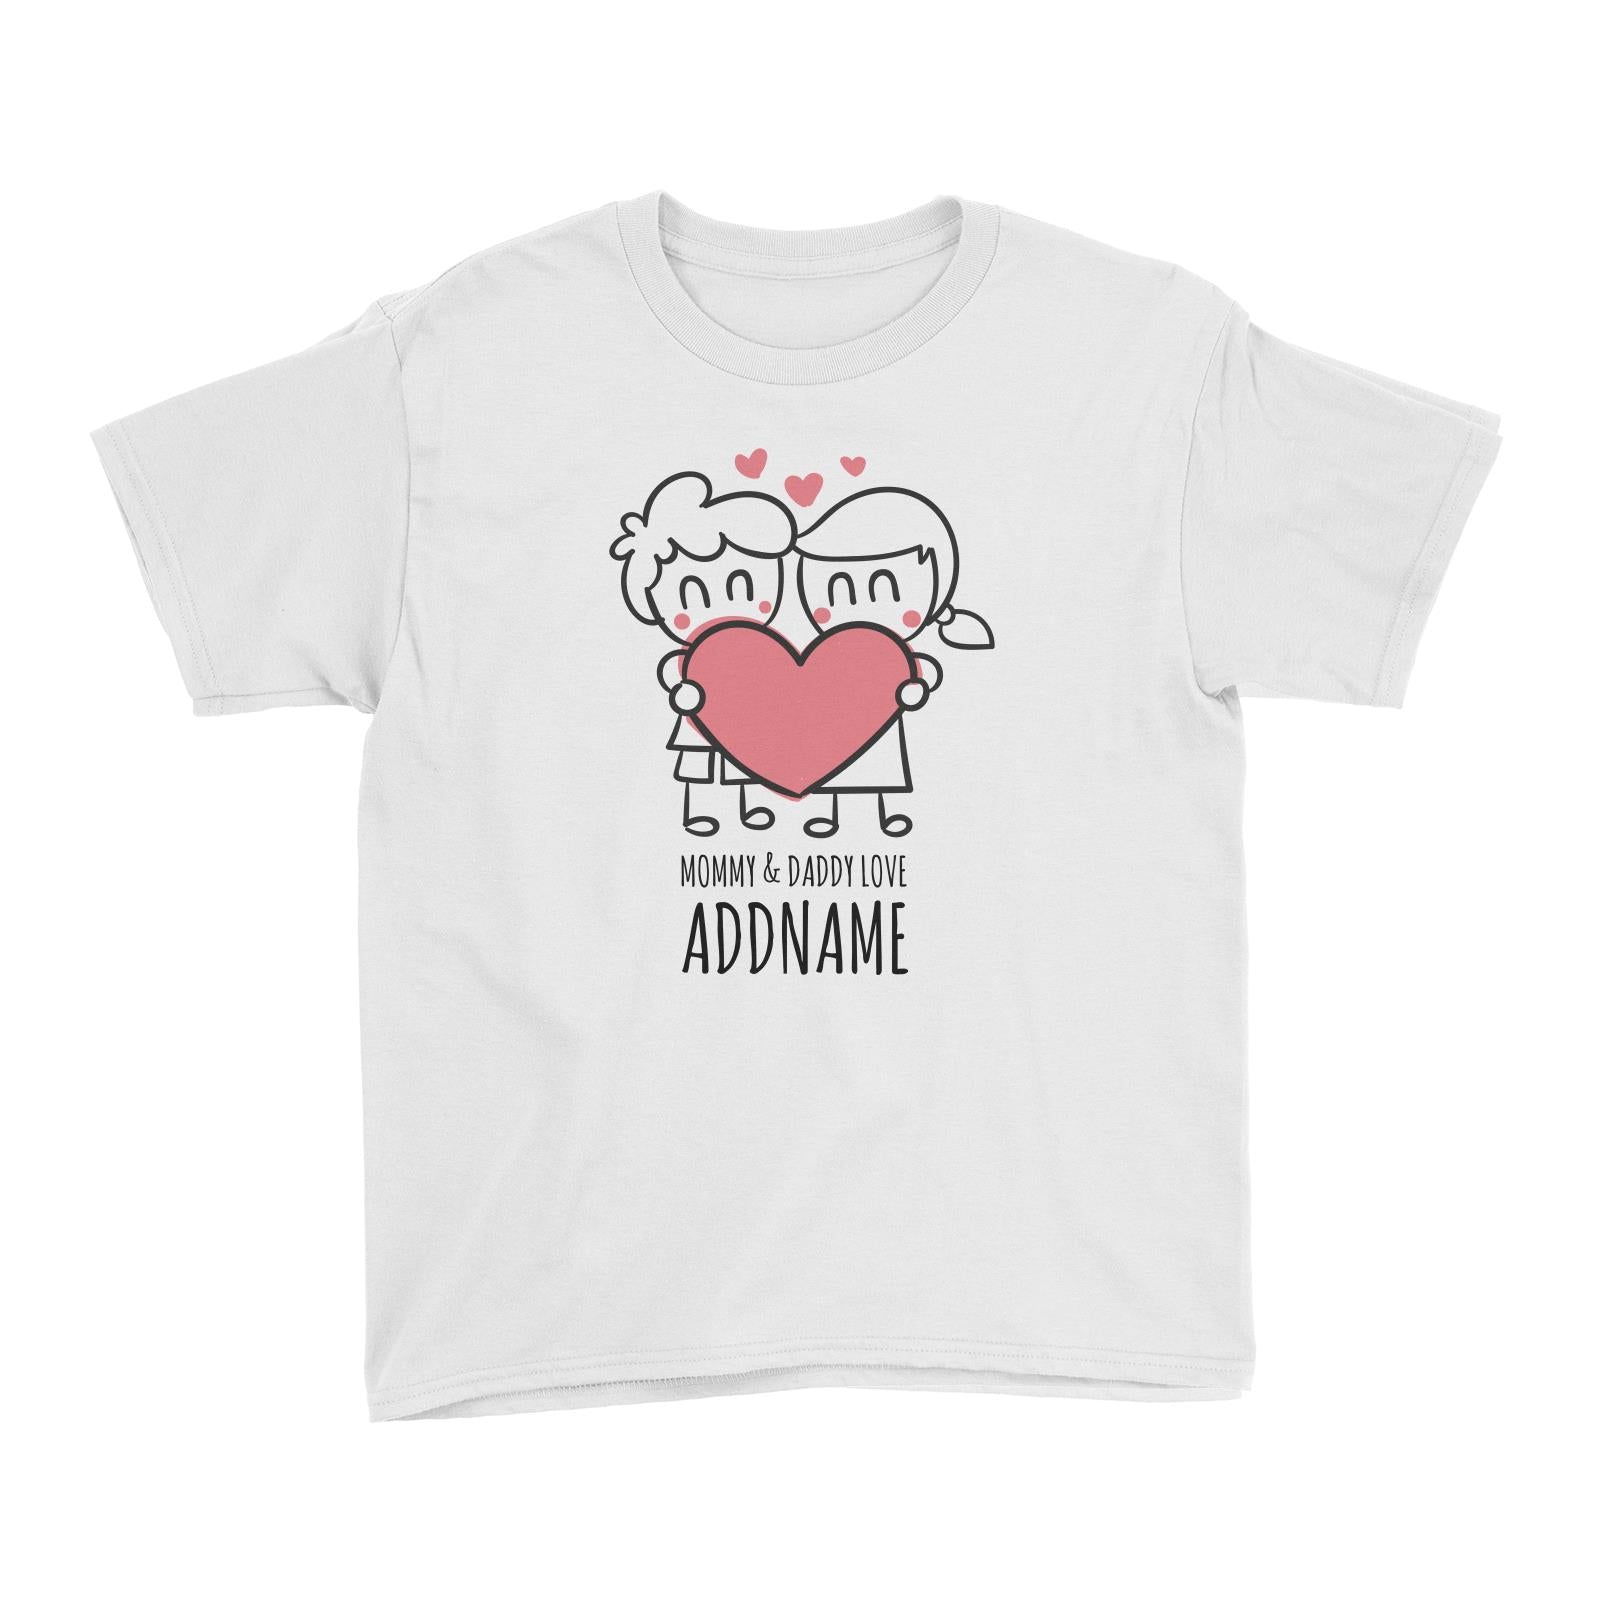 Cartoon Doodle Mommy & Daddy Love White White Kid's T-Shirt  Matching Family Personalizable Designs